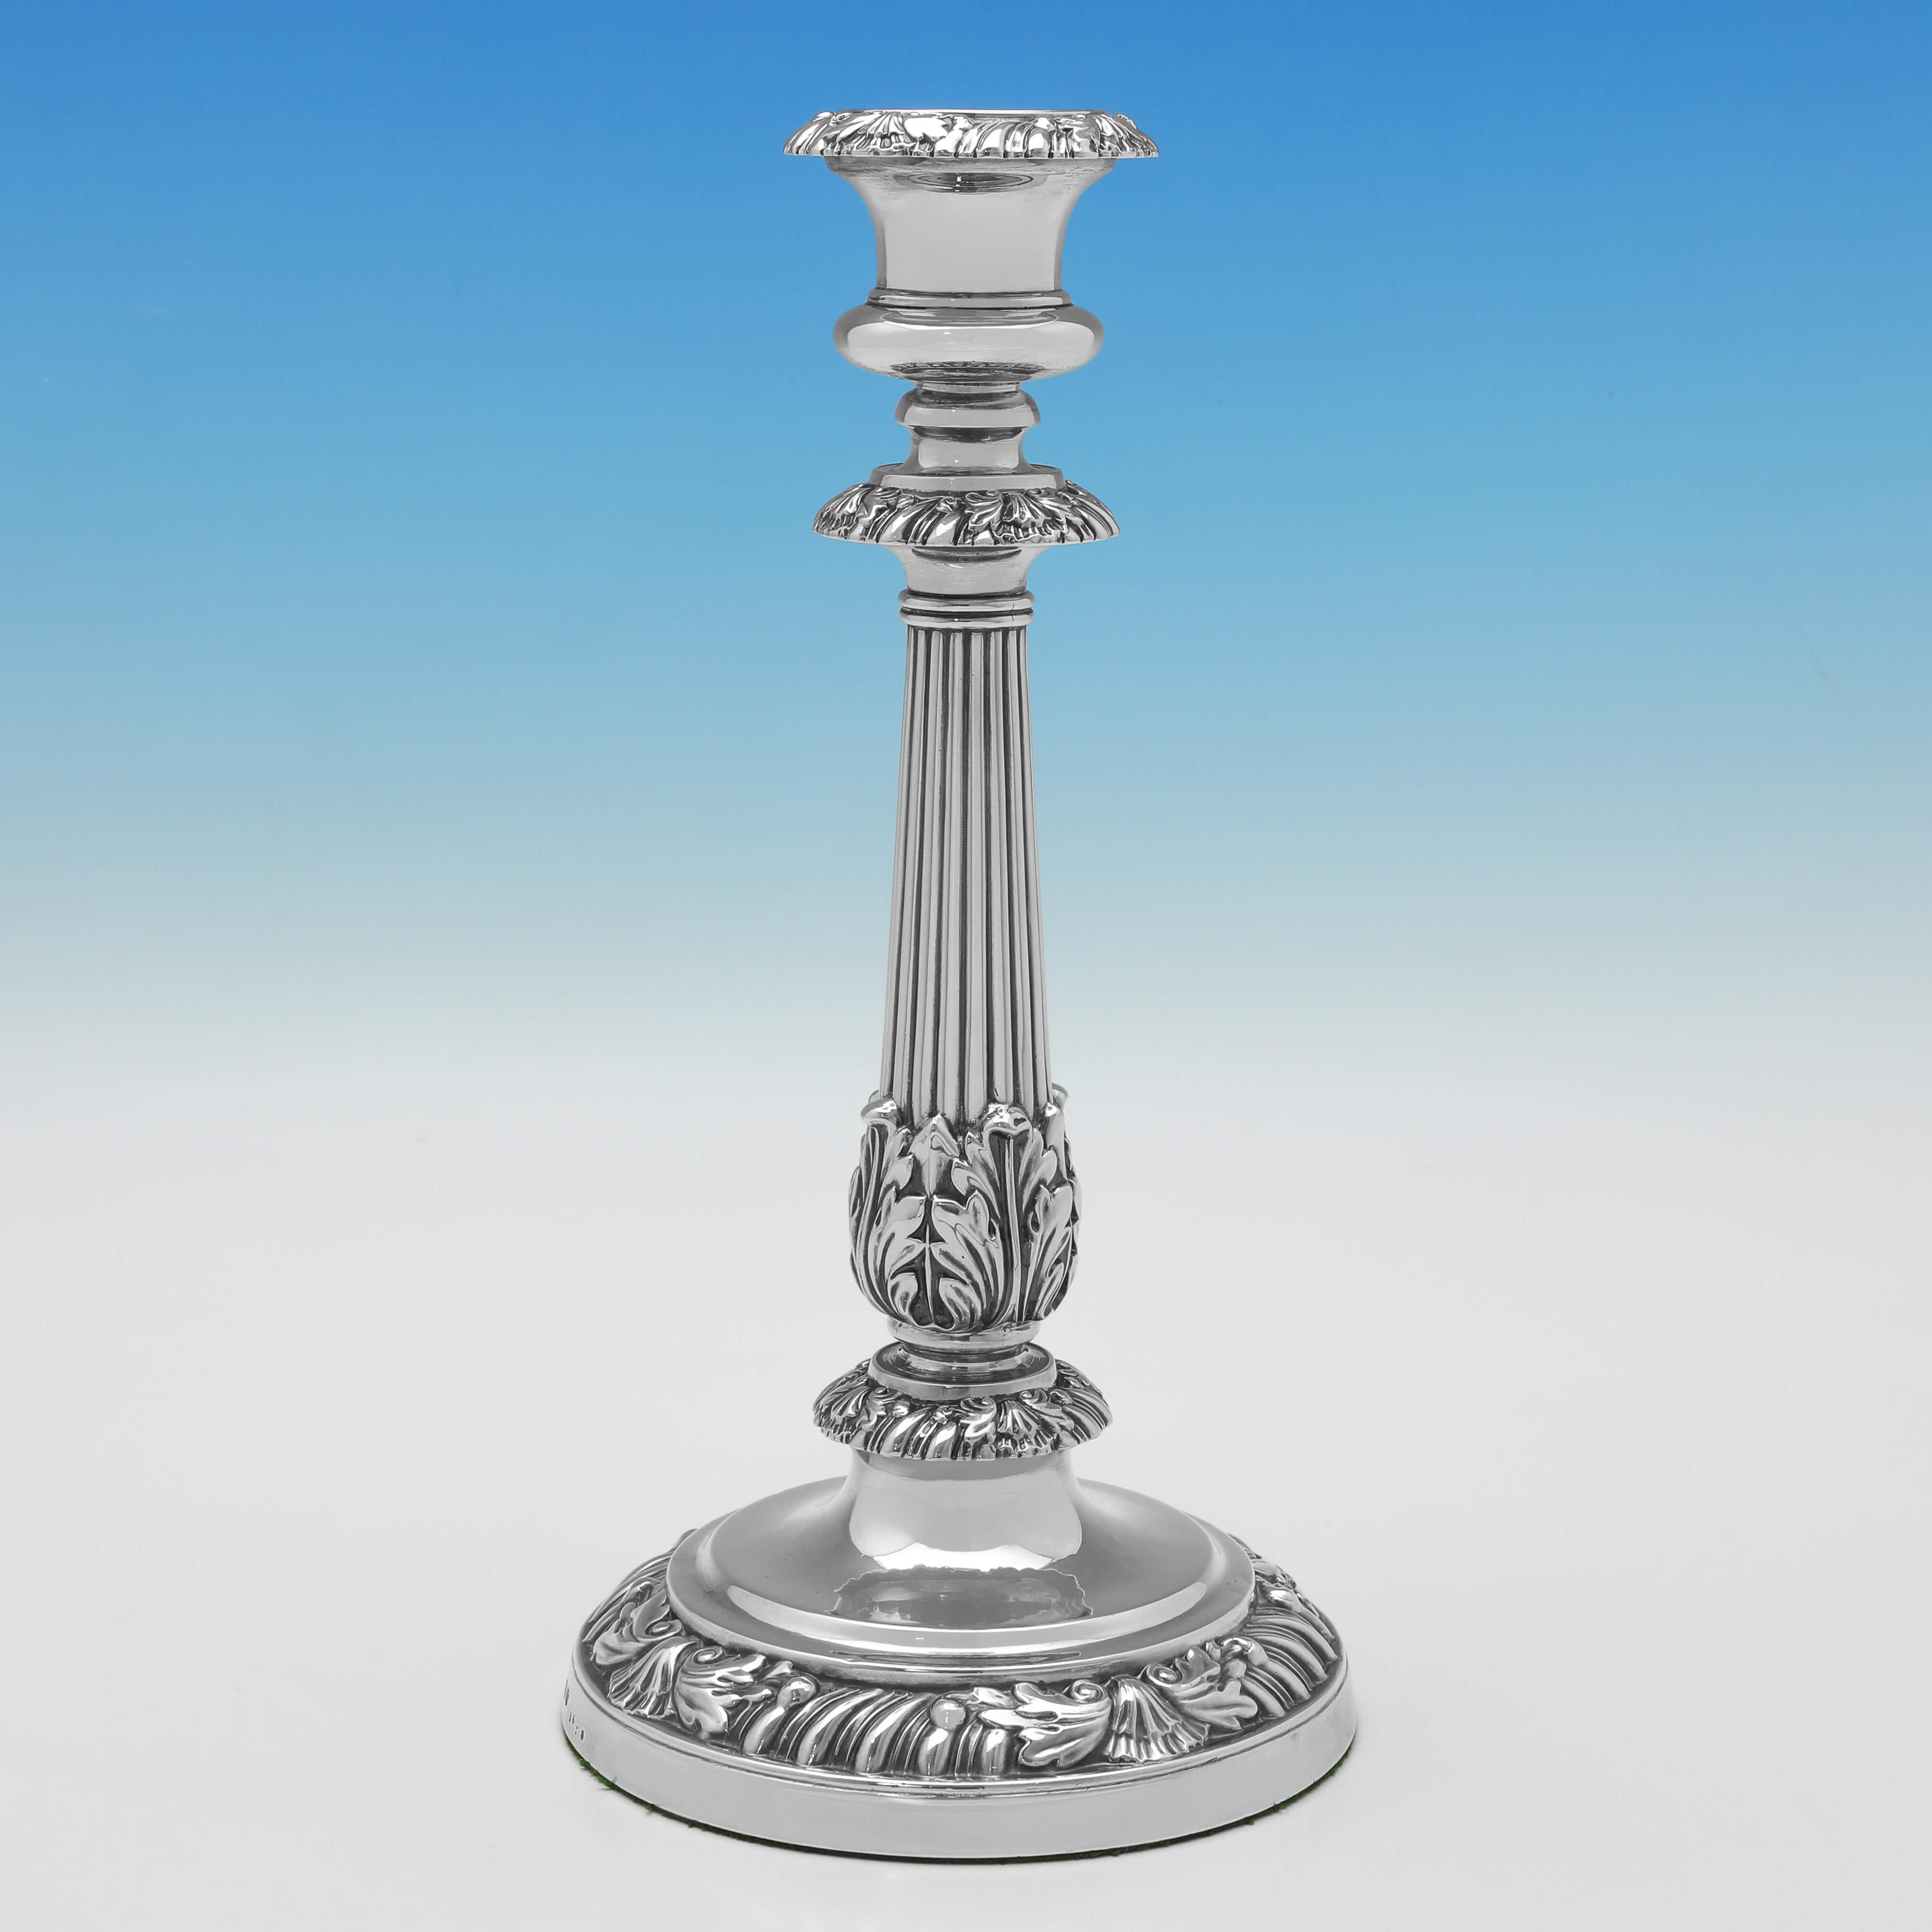 Hallmarked in Birmingham in 1821 by Matthew Boulton, this stunning pair of George IV period, Antique Sterling Silver Candlesticks, feature gadroon, shell and acanthus borders, acanthus detailing to the fluted columns, and removable nozzles. 

Each